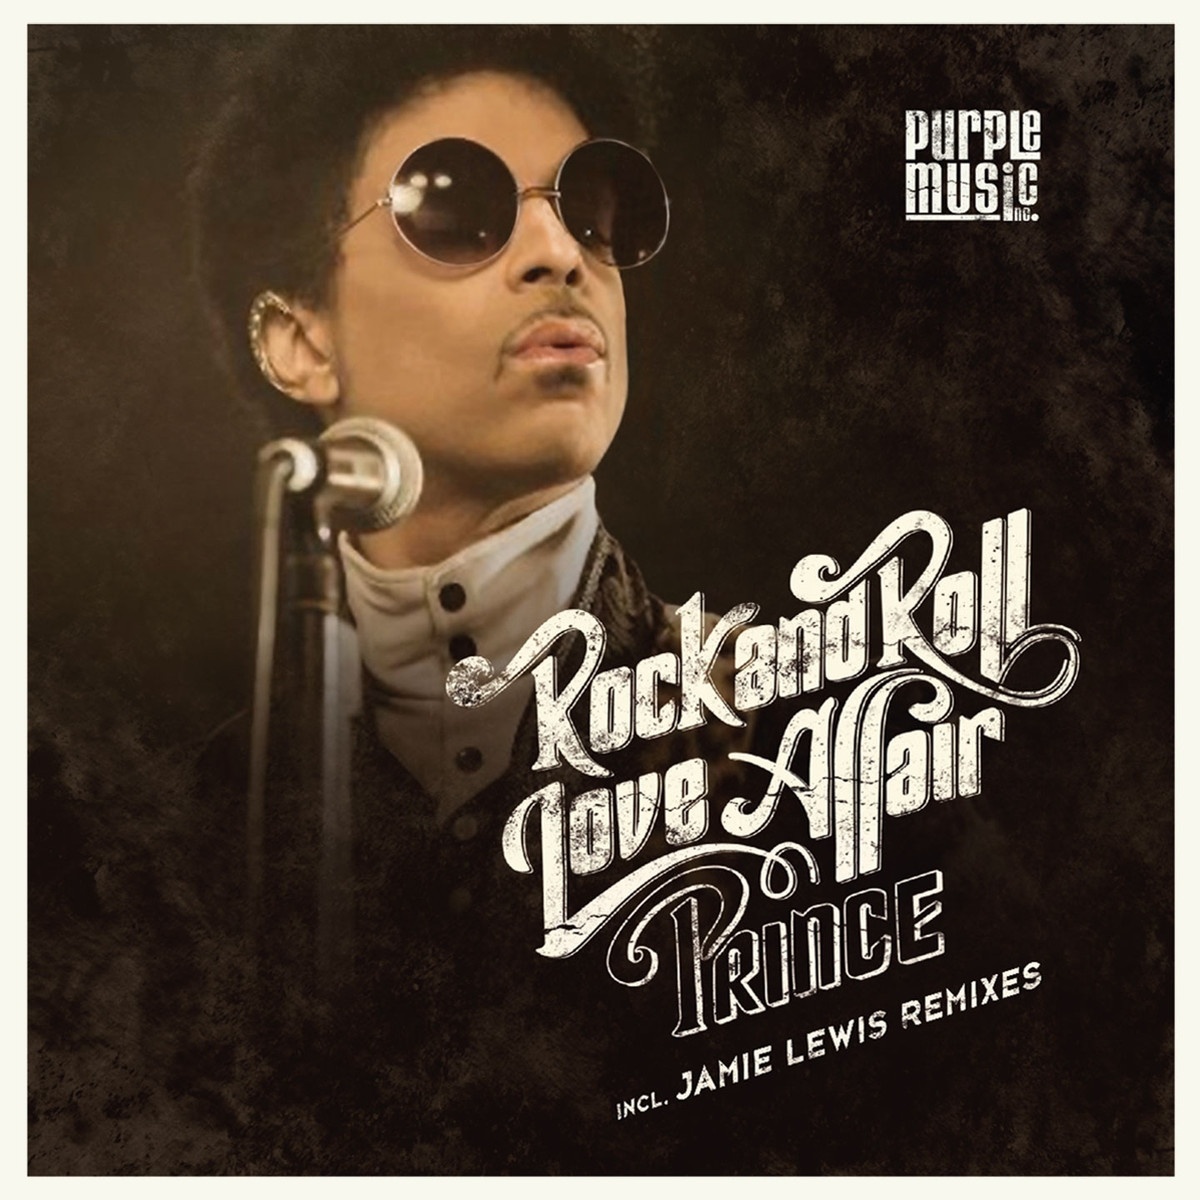 Rock And Roll Love Affair (Jamie Lewis Stripped Down Radio Mix)